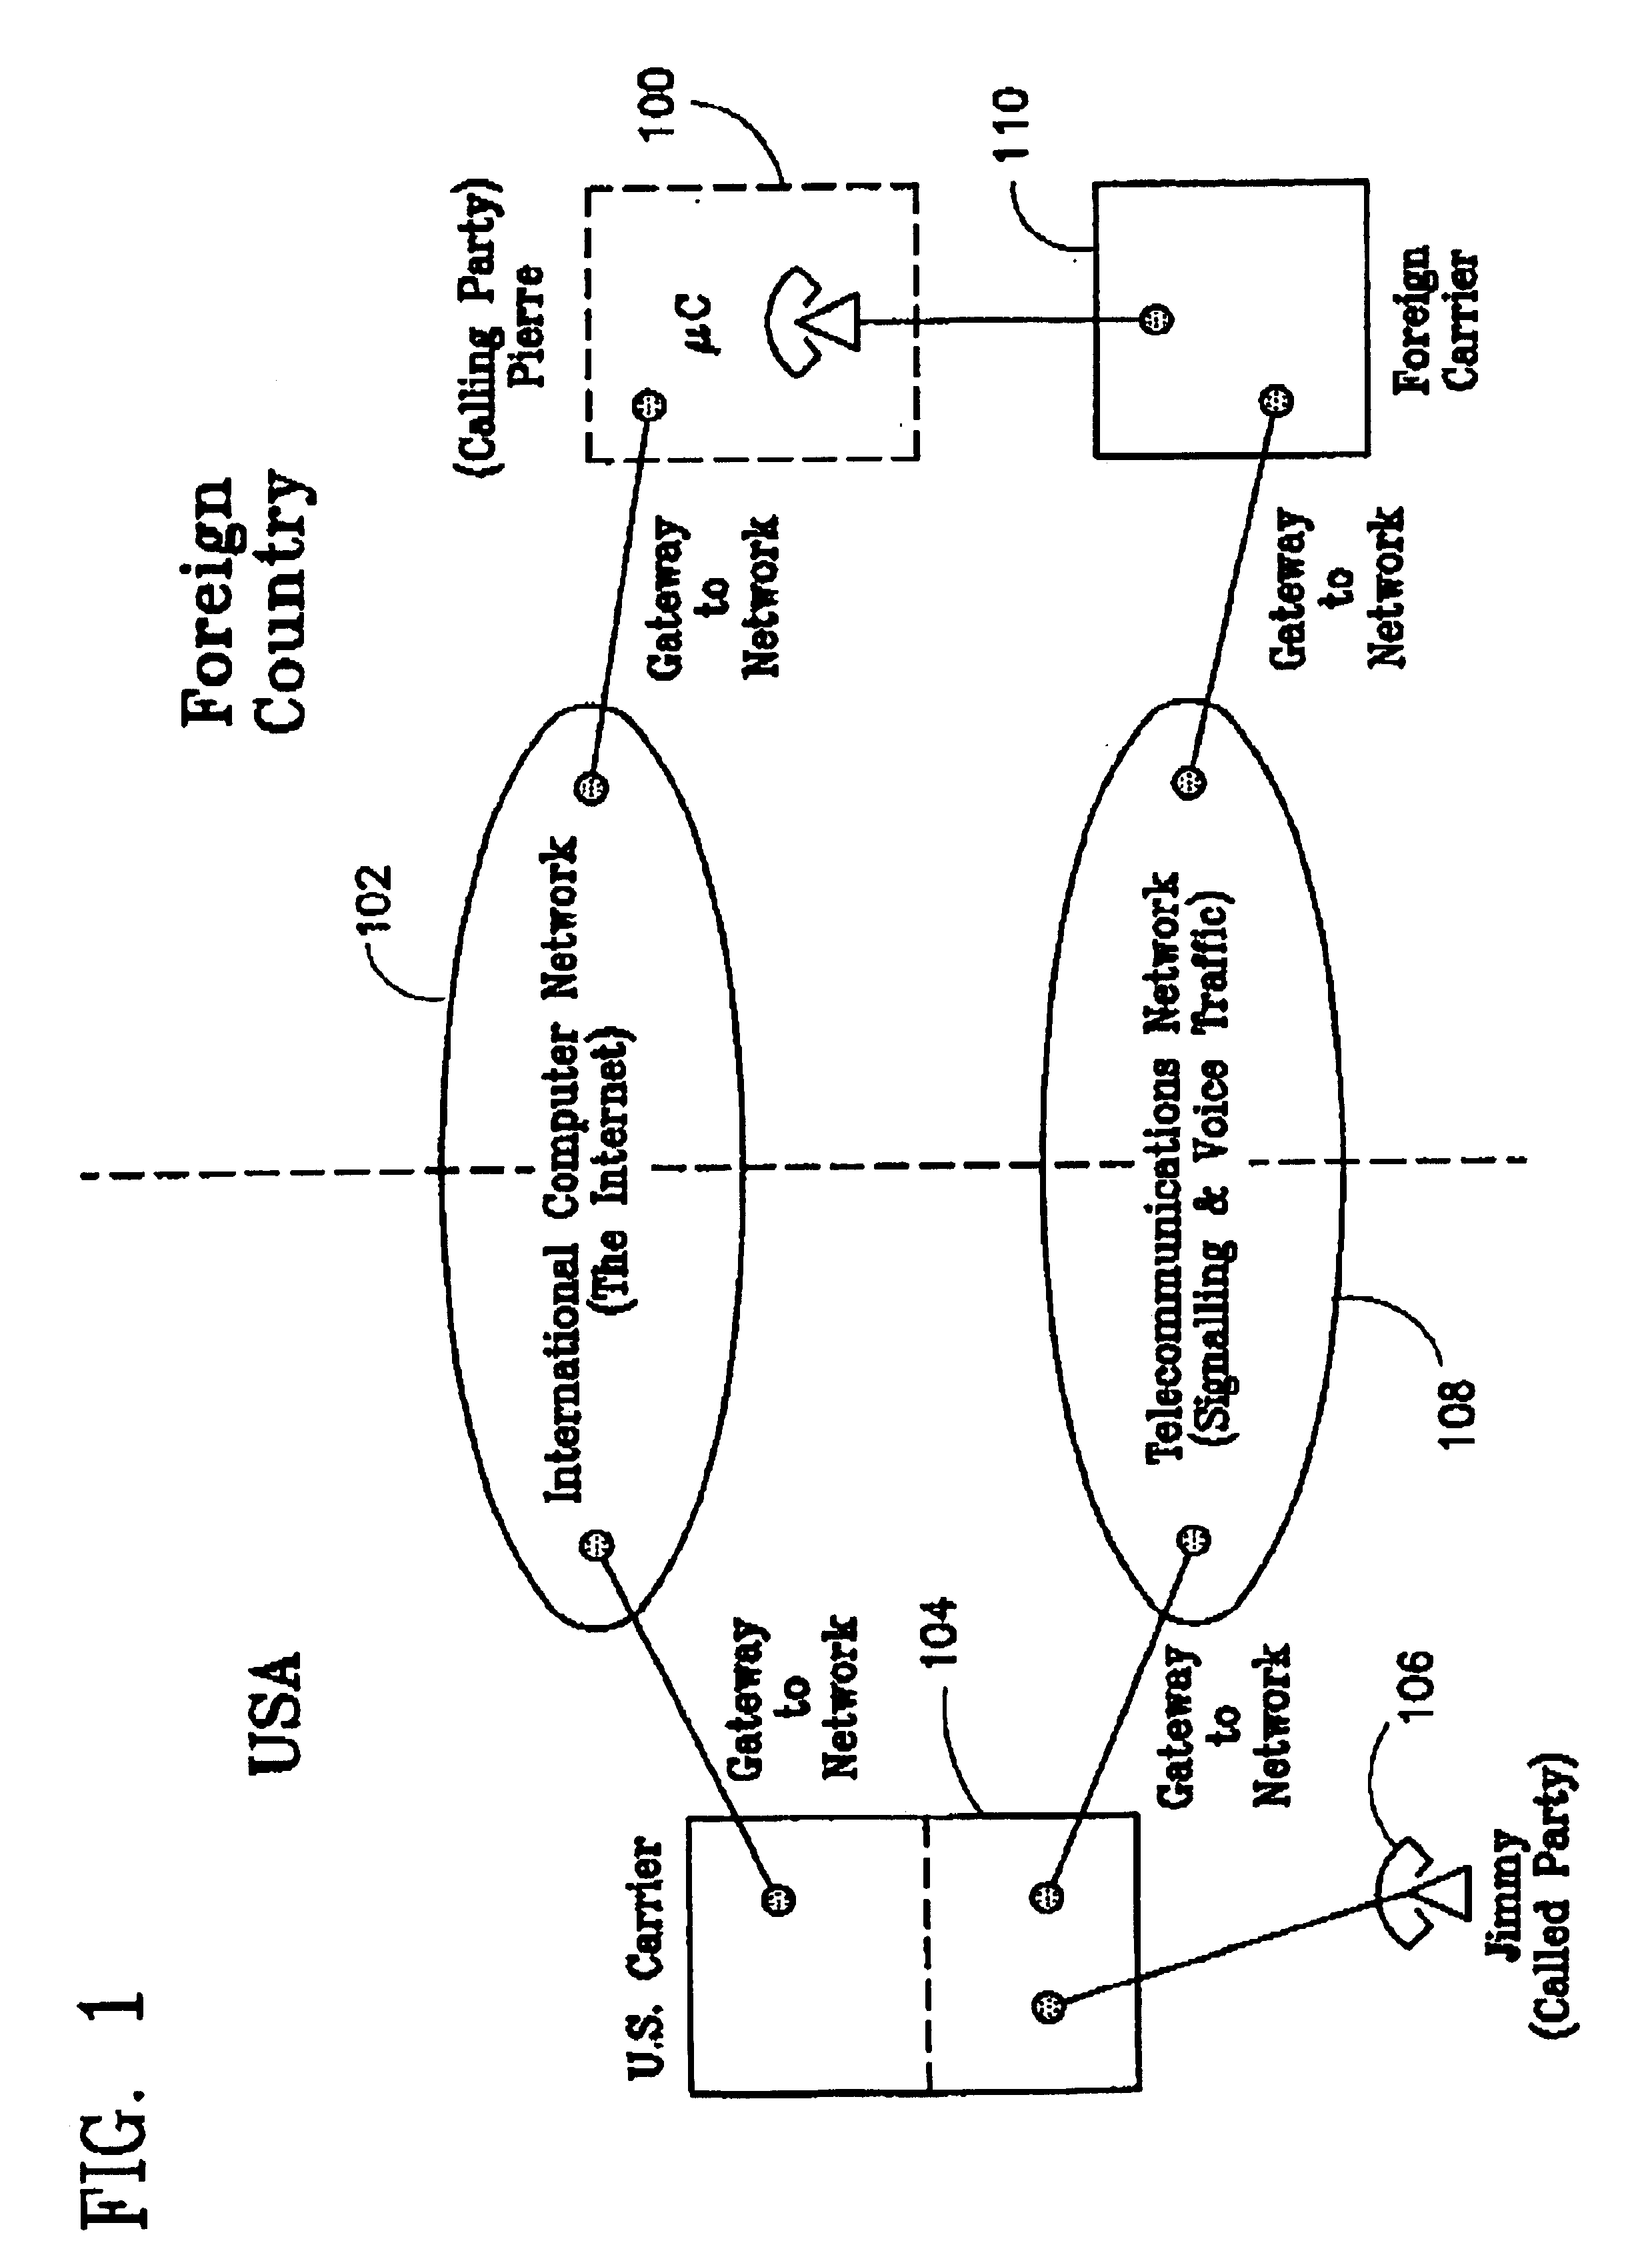 Reverse call origination via a packet switched network